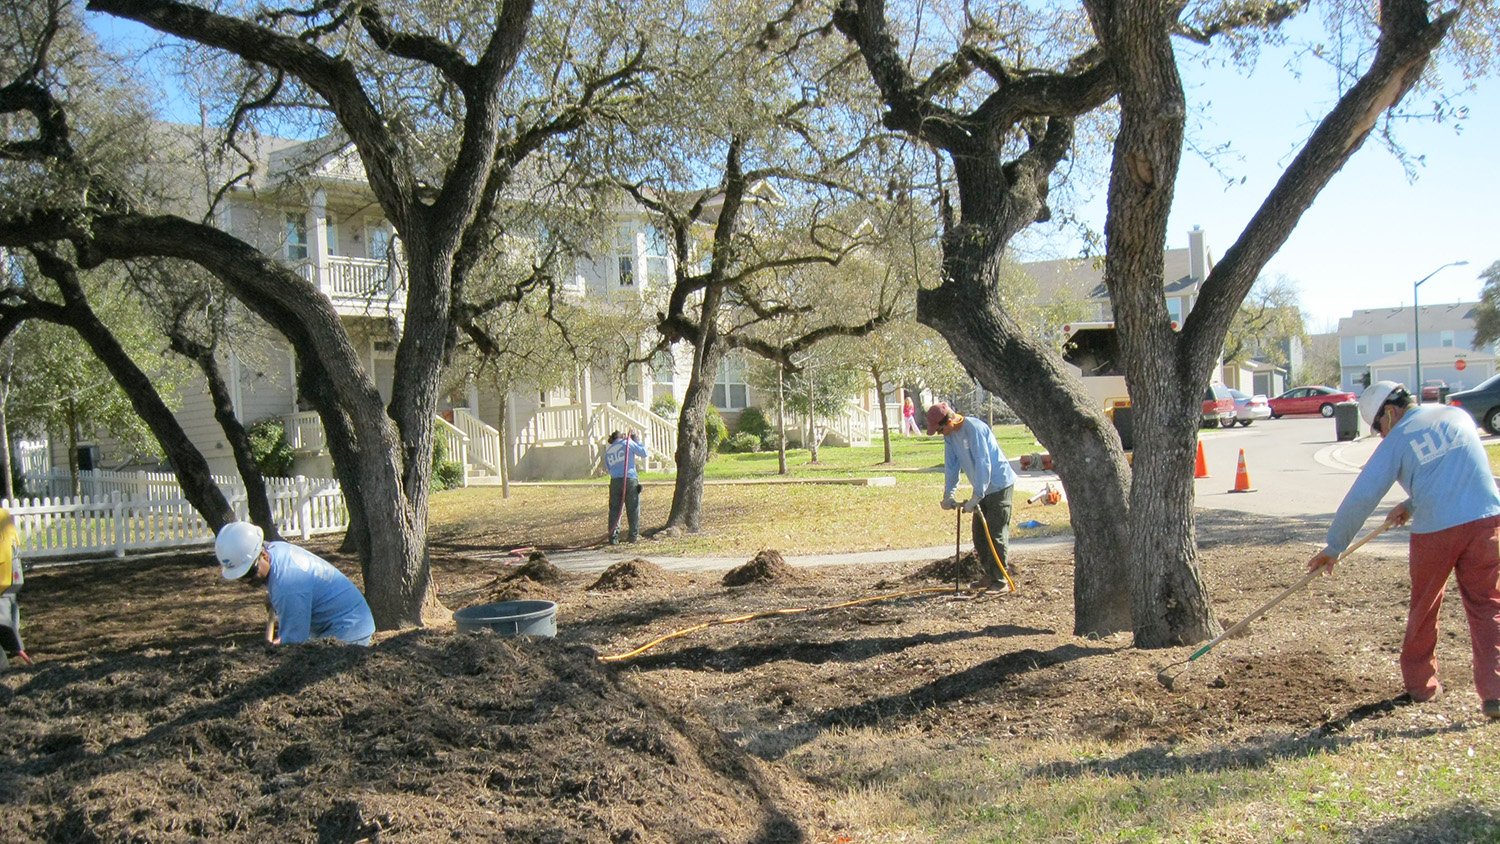 Austin tree service workers mulch trees at a community park.